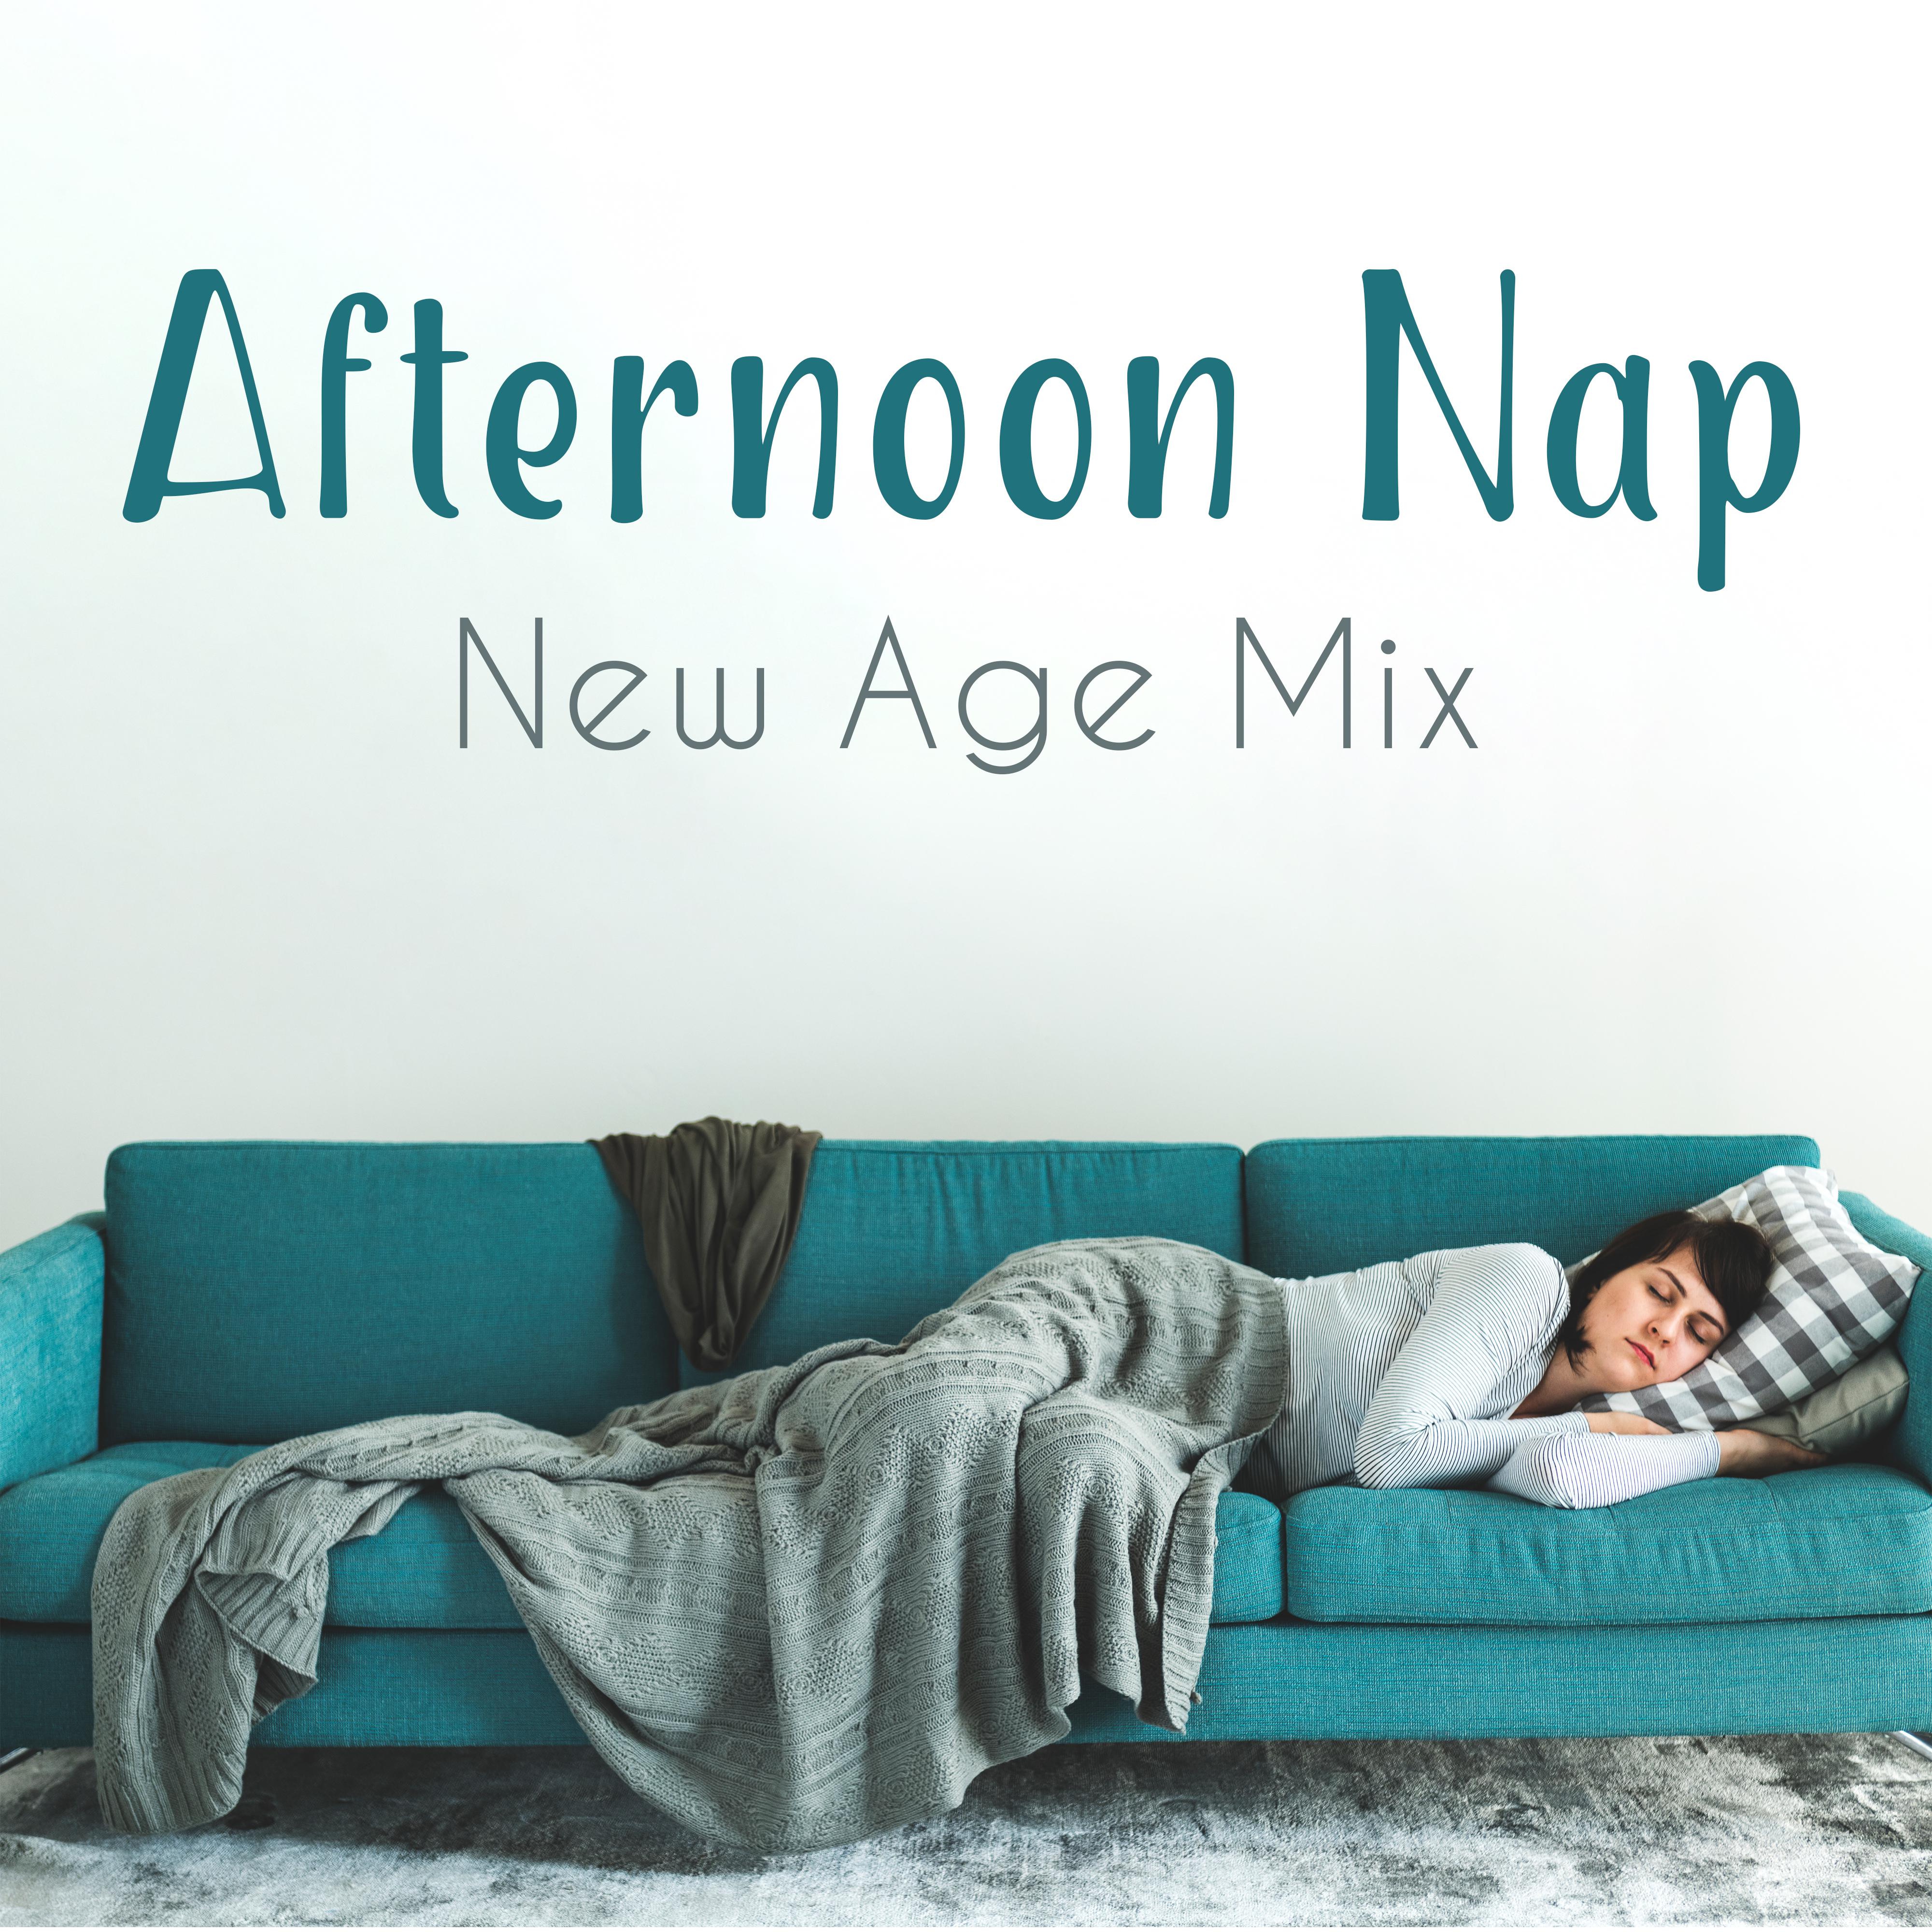 Afternoon Nap: New Age Mix